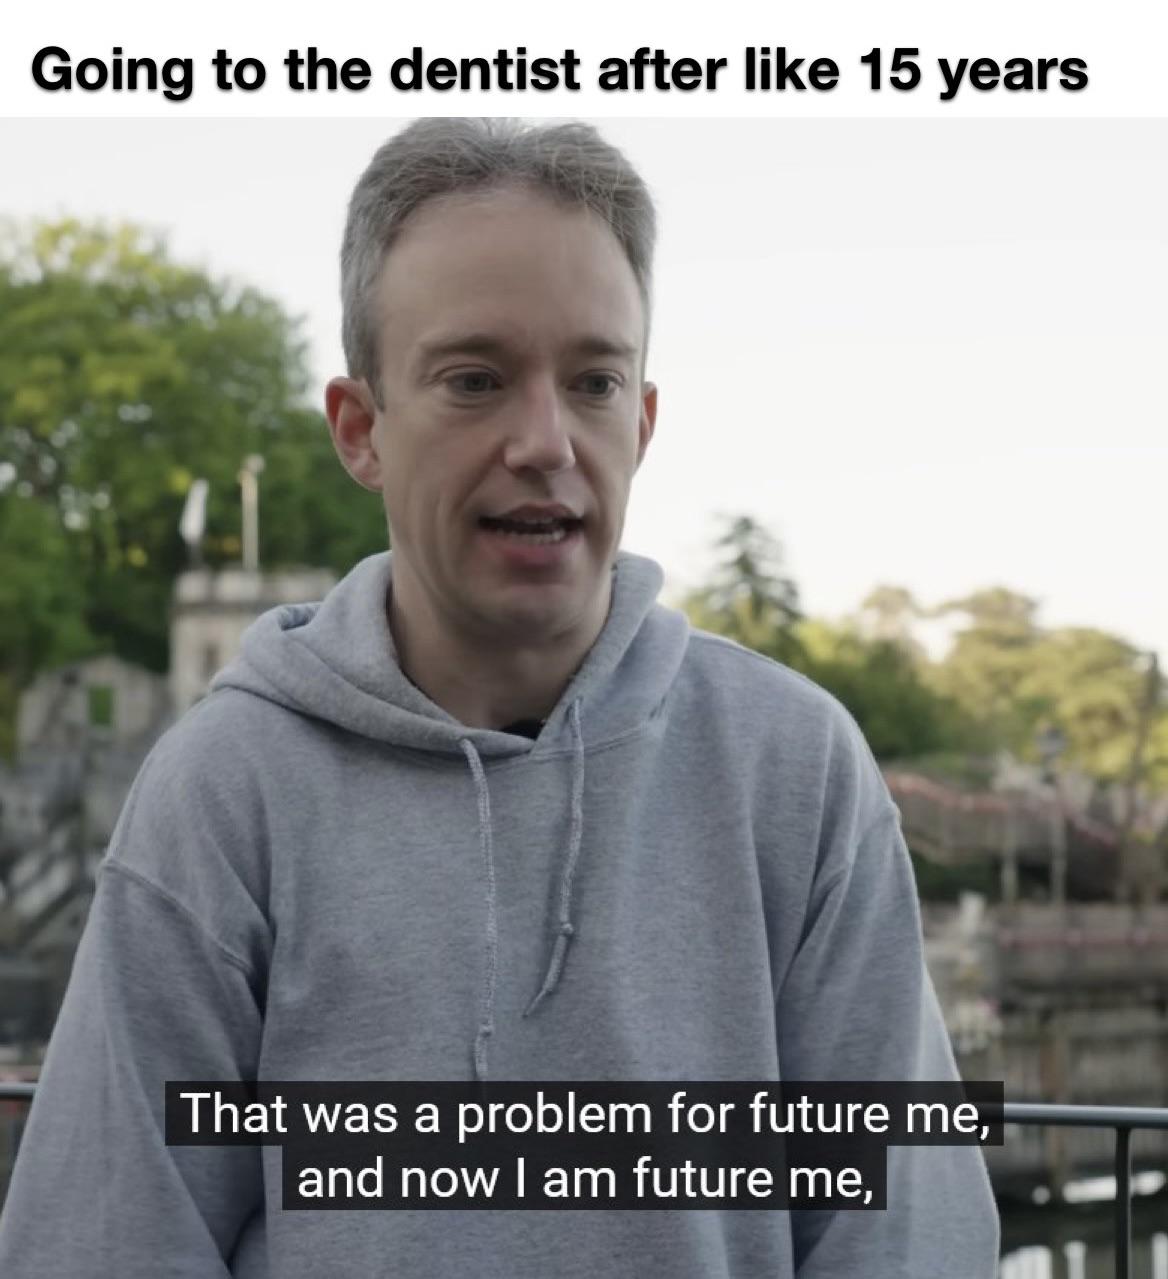 dank memes - dick star wars meme - Going to the dentist after 15 years That was a problem for future me, and now I am future me,